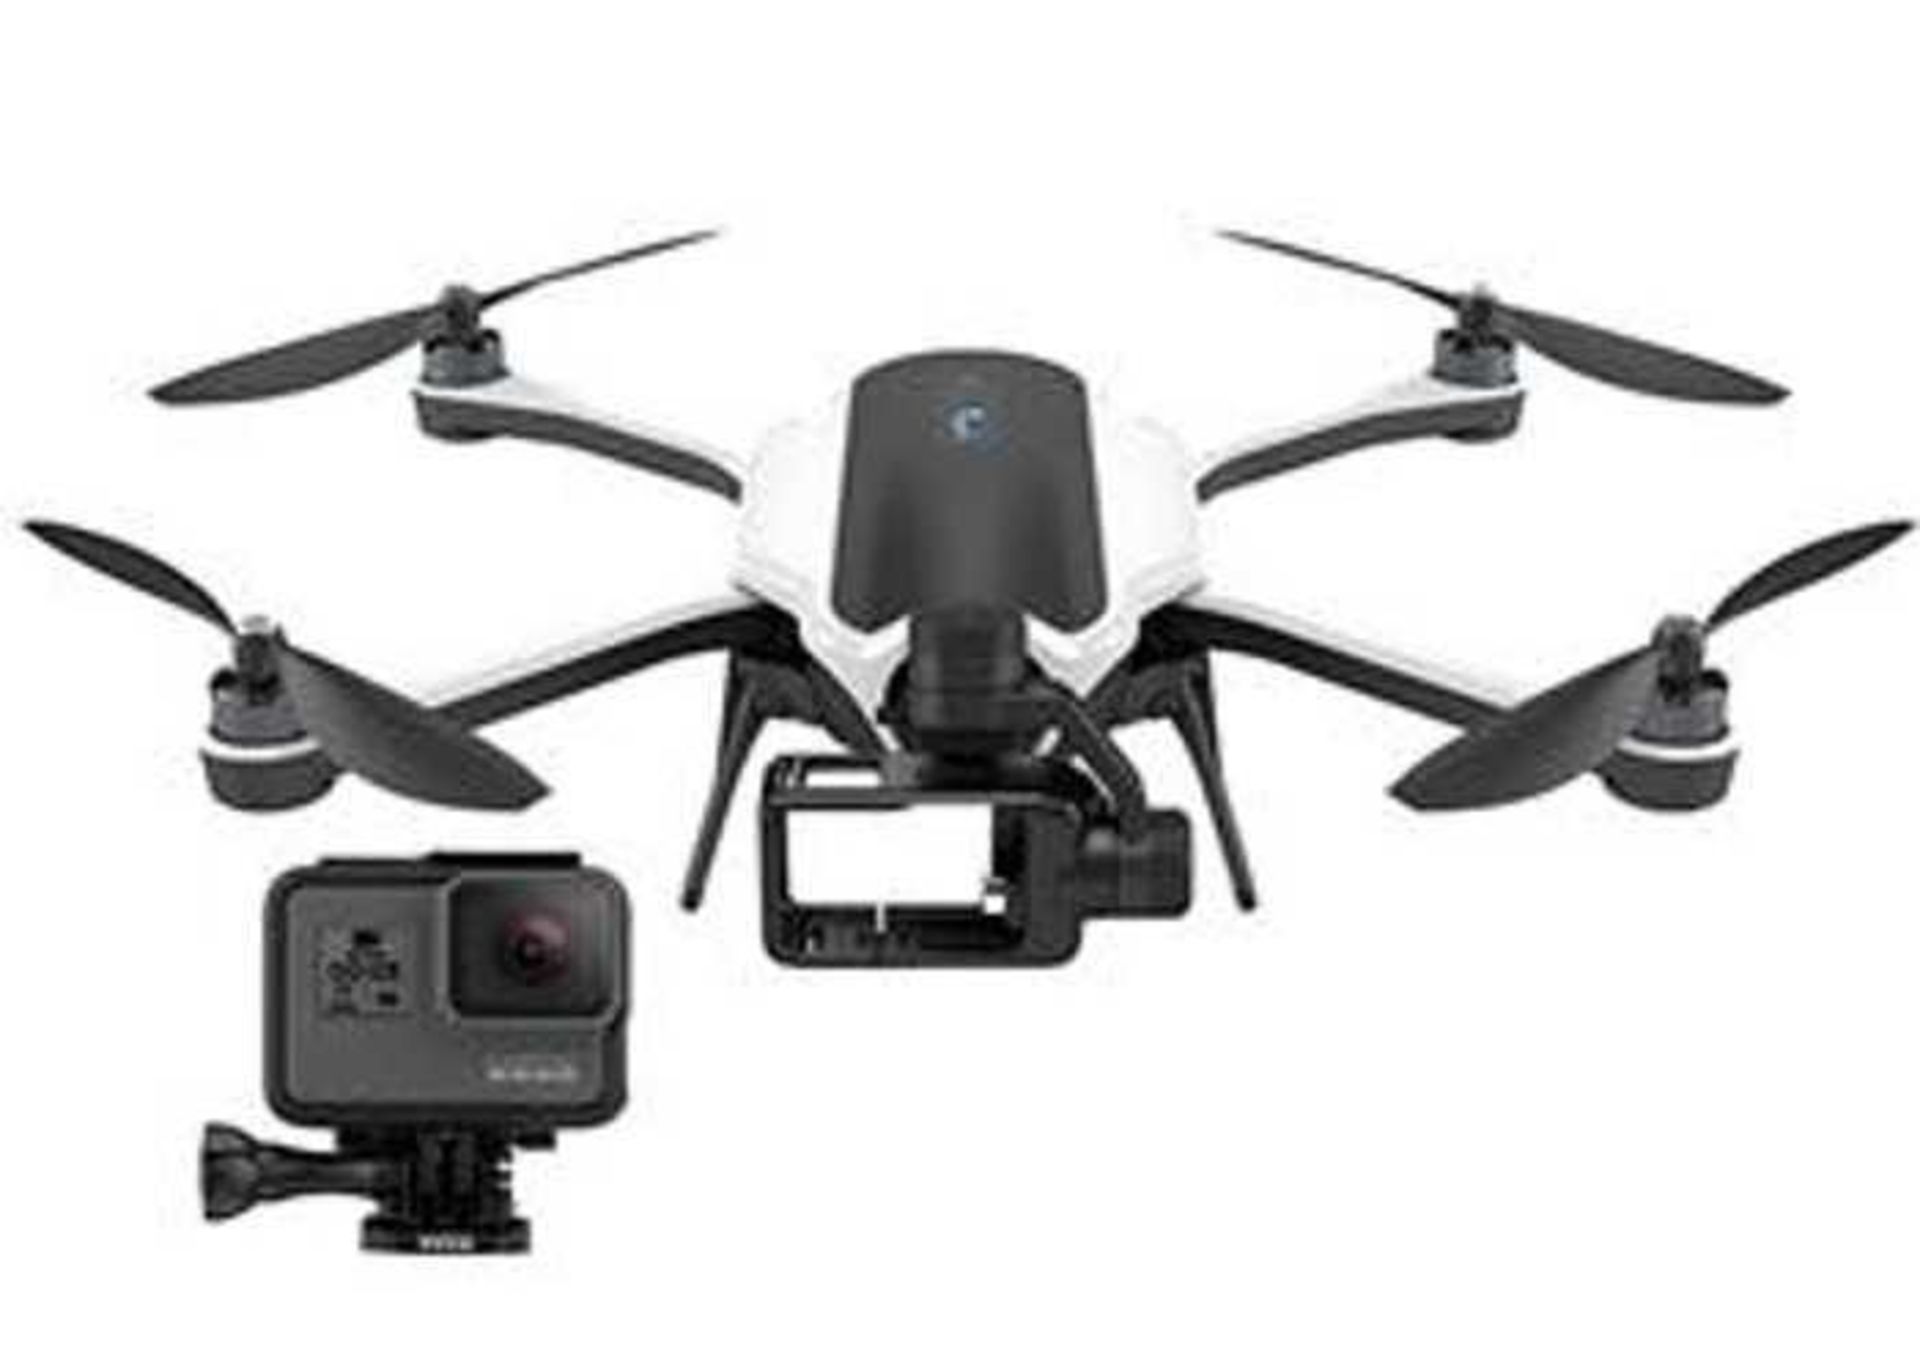 Rrp £900 Go Pro Karma Ultra Portable Drone With Hero 5 Action Camera (Lightweight Case Included)